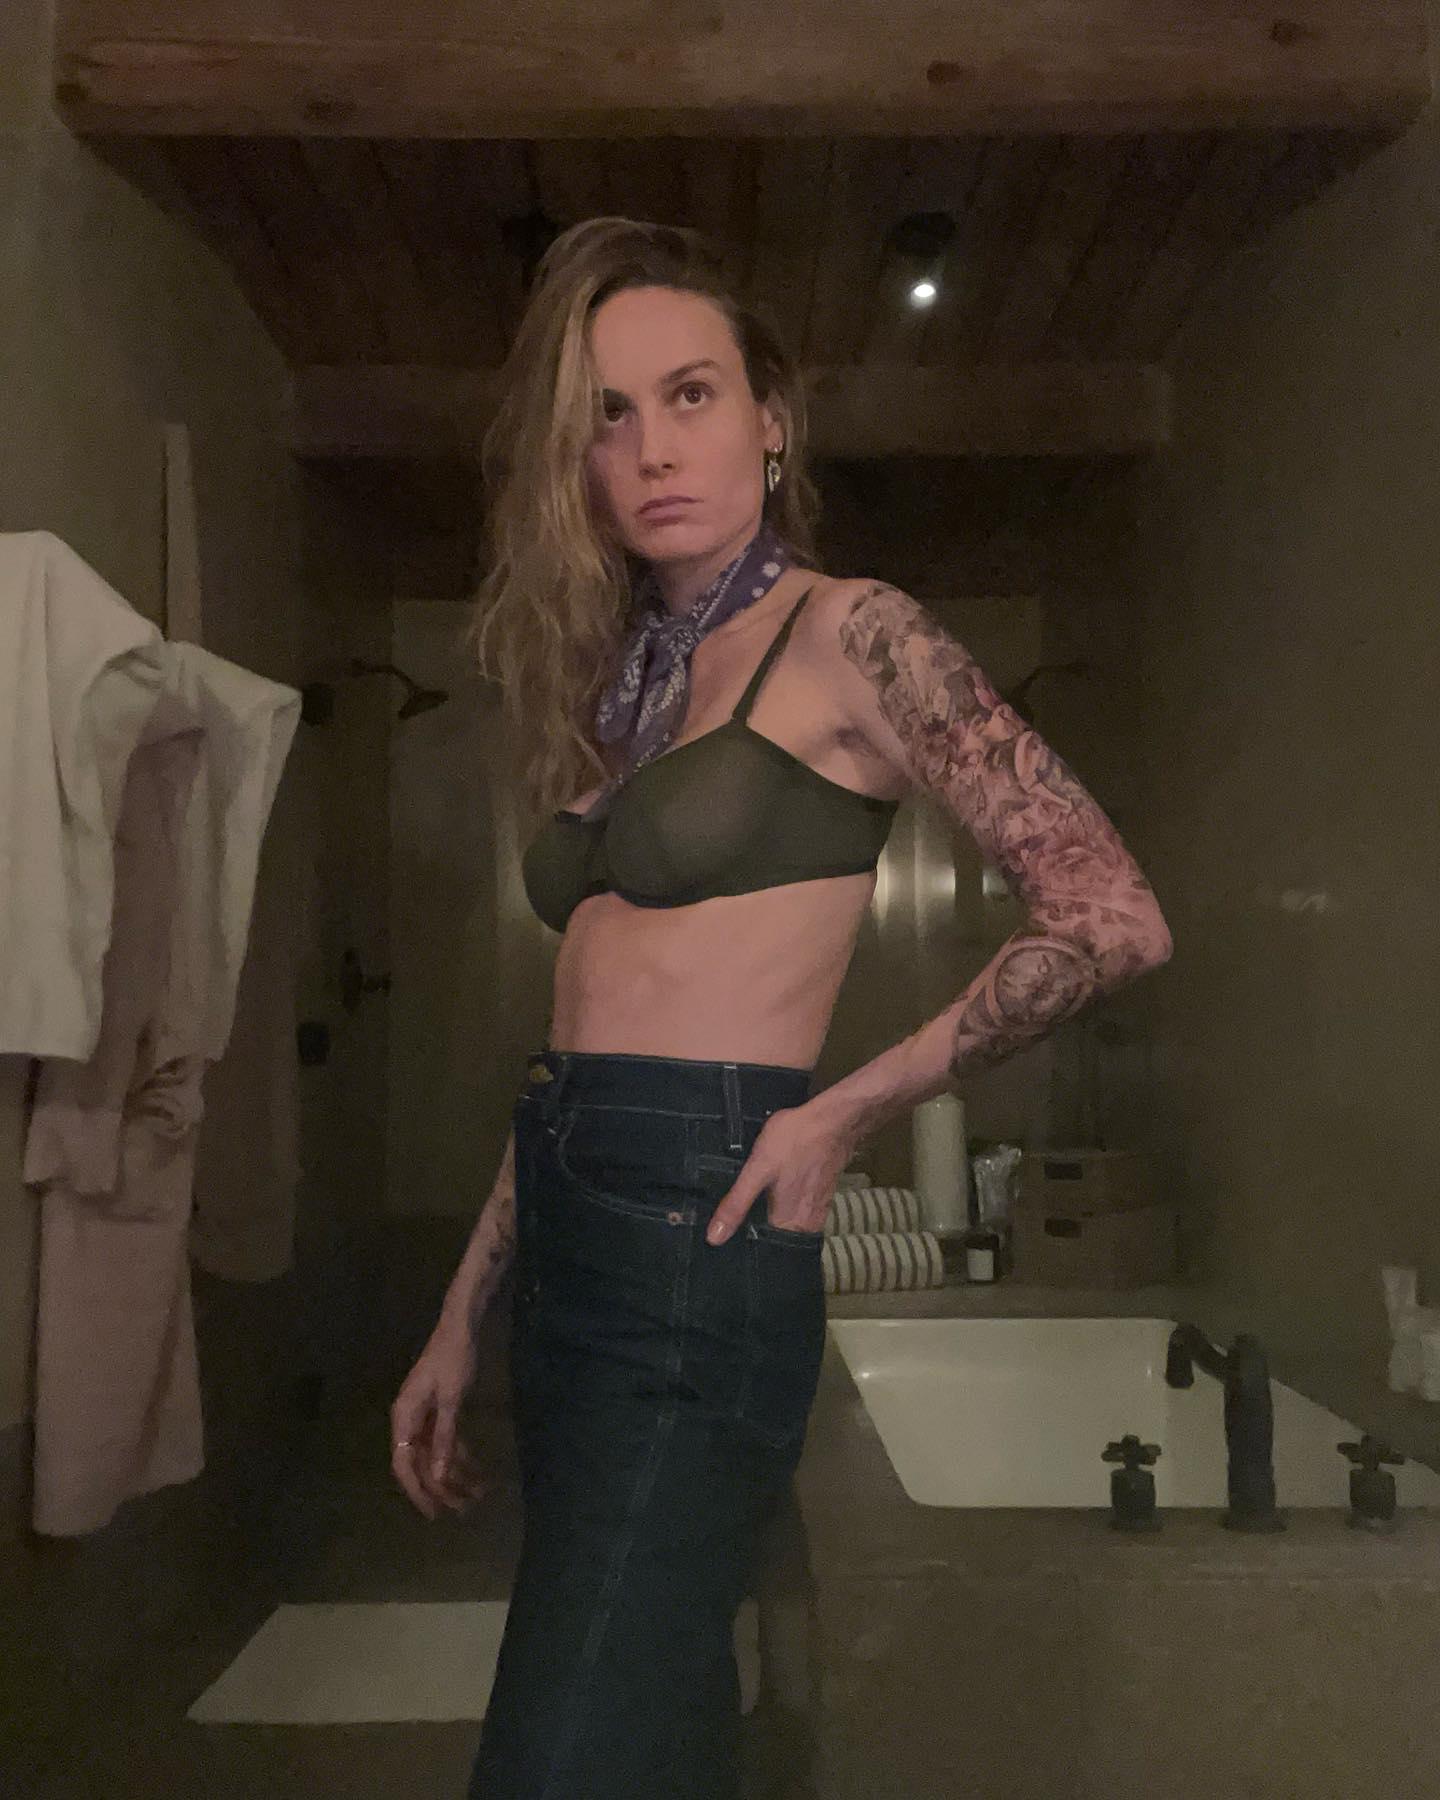 Brie Larson shows off an armful of tattoos